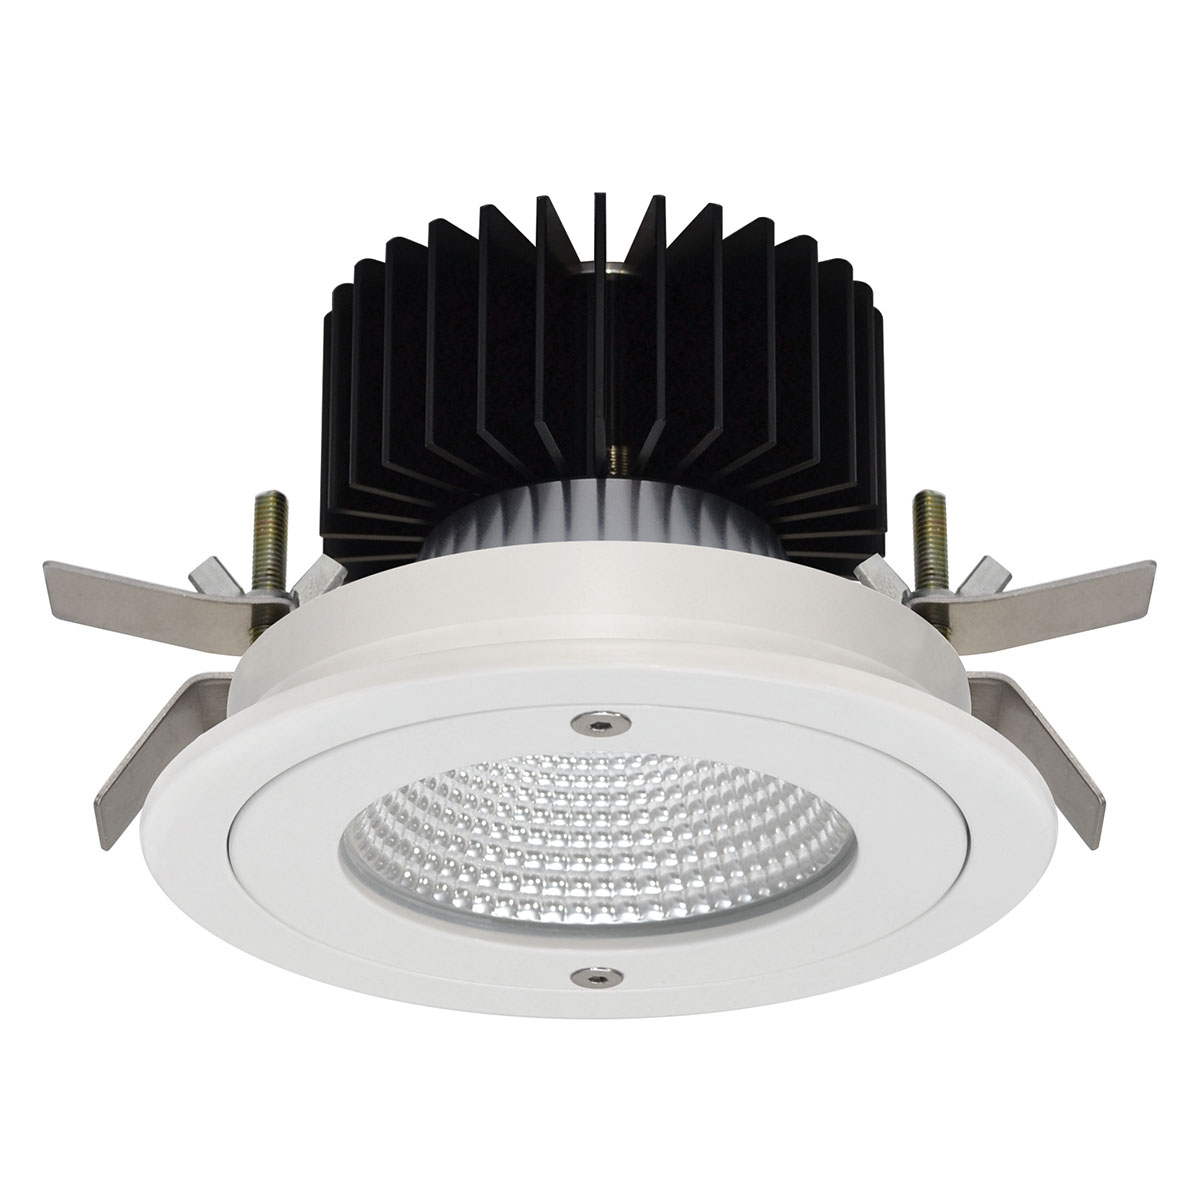 Kopa 13W Anti Tamper Fixed Round Recessed Downlight IP65 Rated 25° Degree Reflector Black